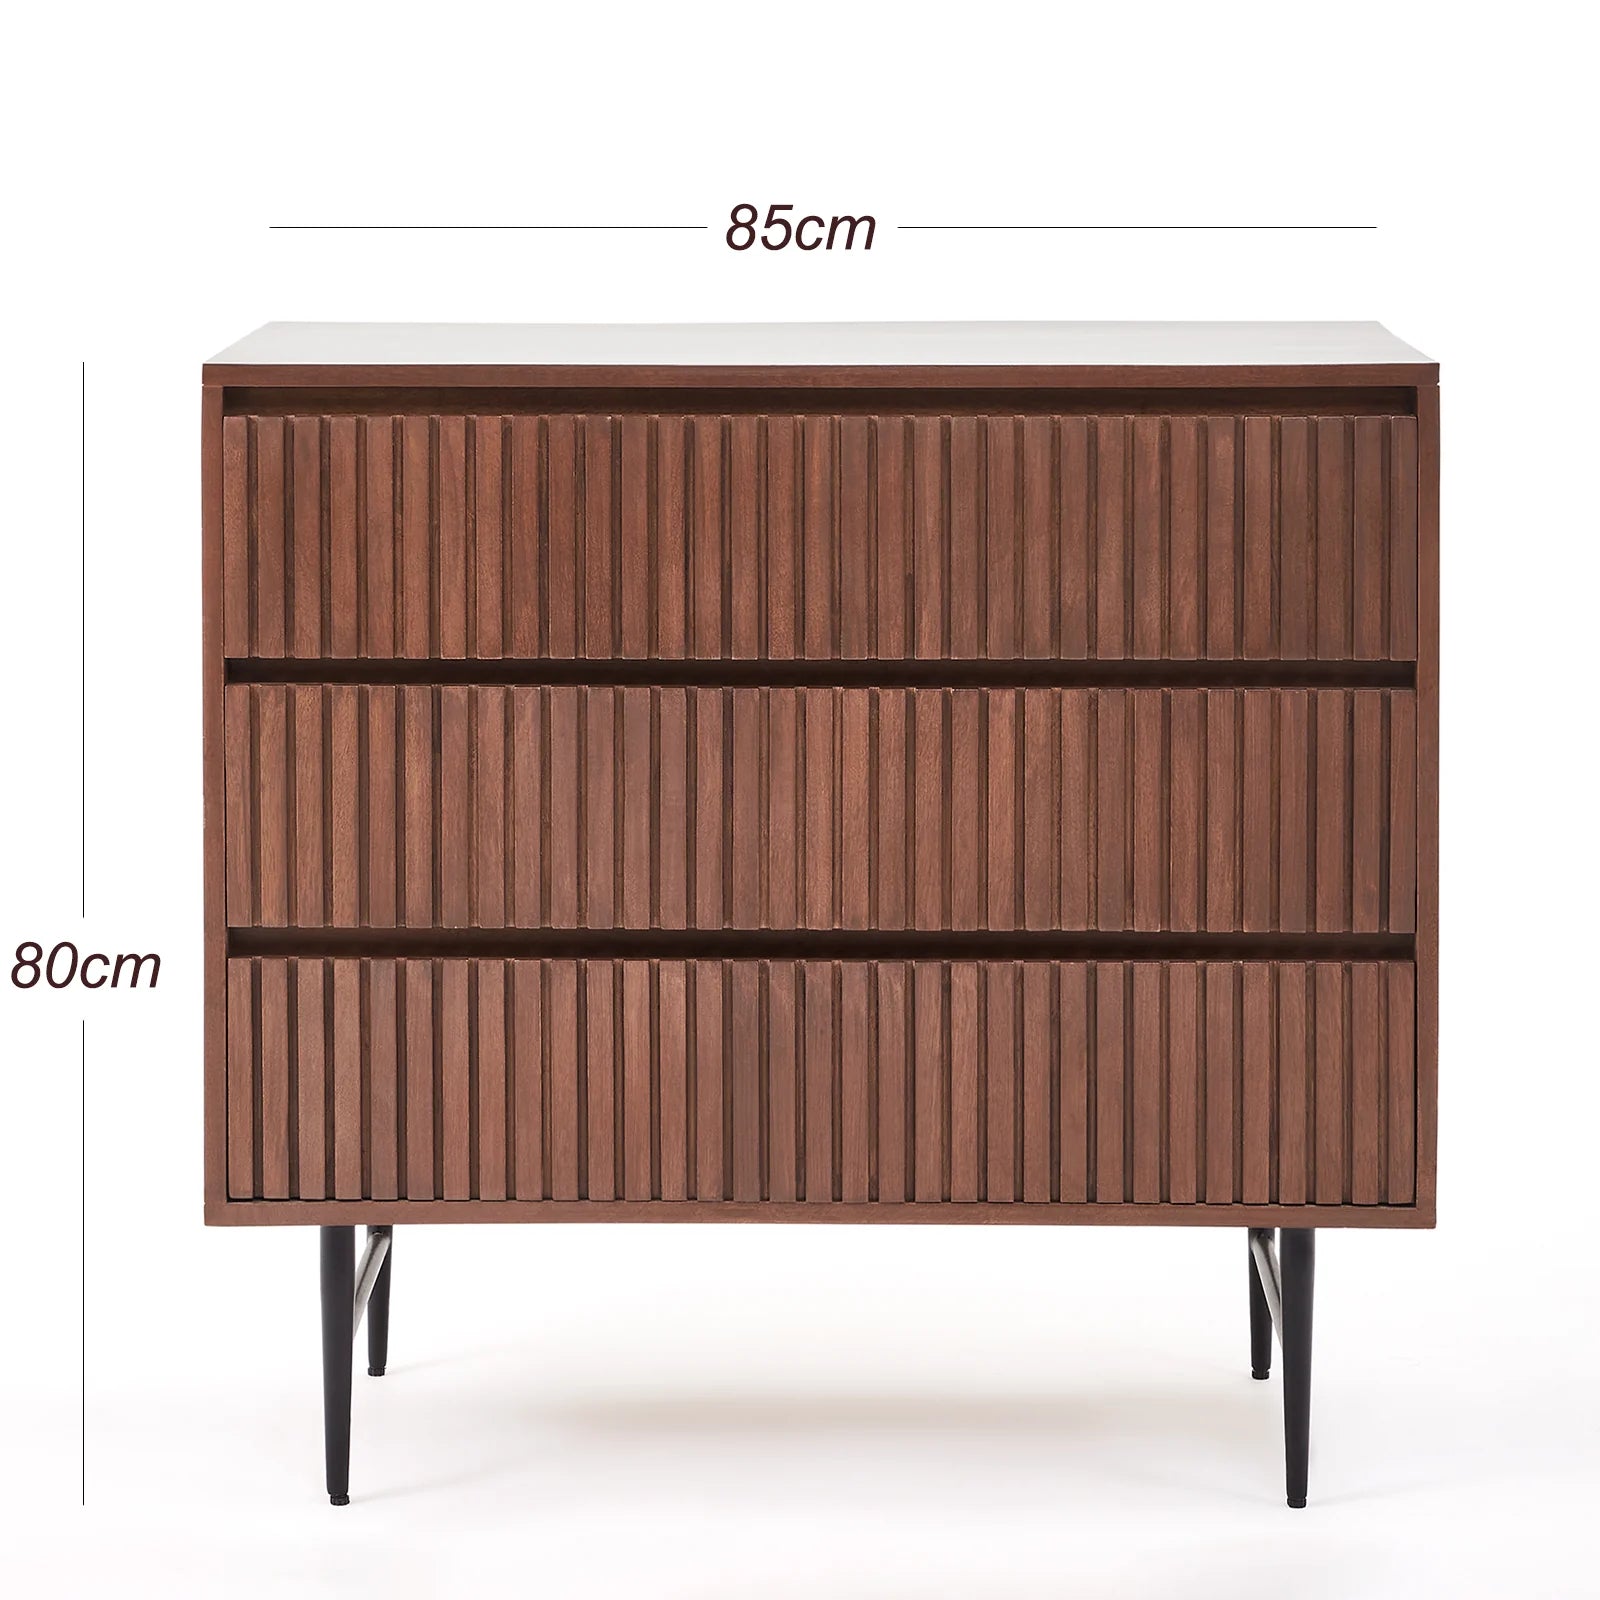 Maxim industrial dark walnut chest of drawers with 3 drawers and metal detailing | malletandplane.com